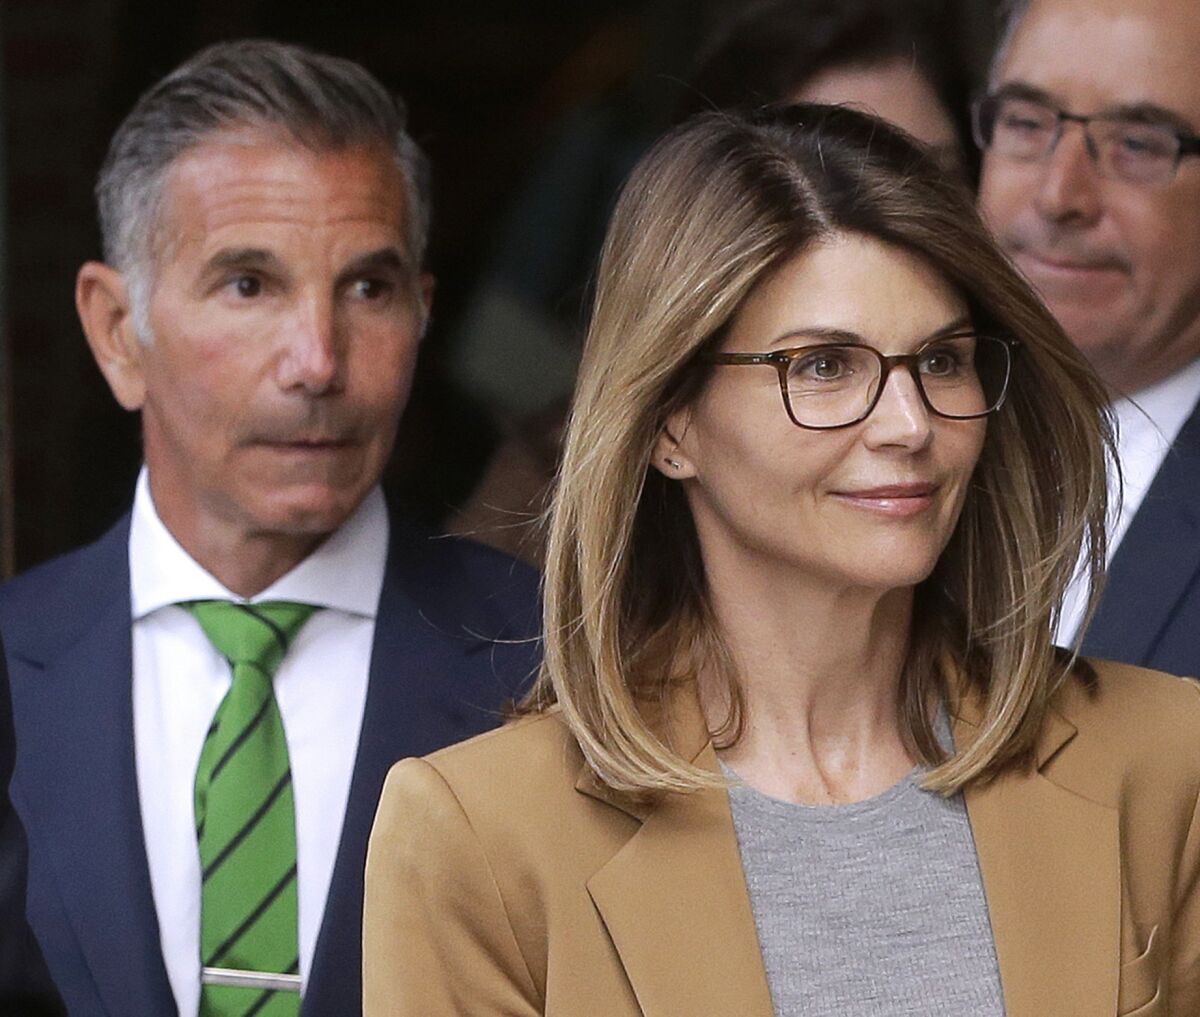 Lori Loughlin, front, and husband Mossimo Giannulli, left, leave court.